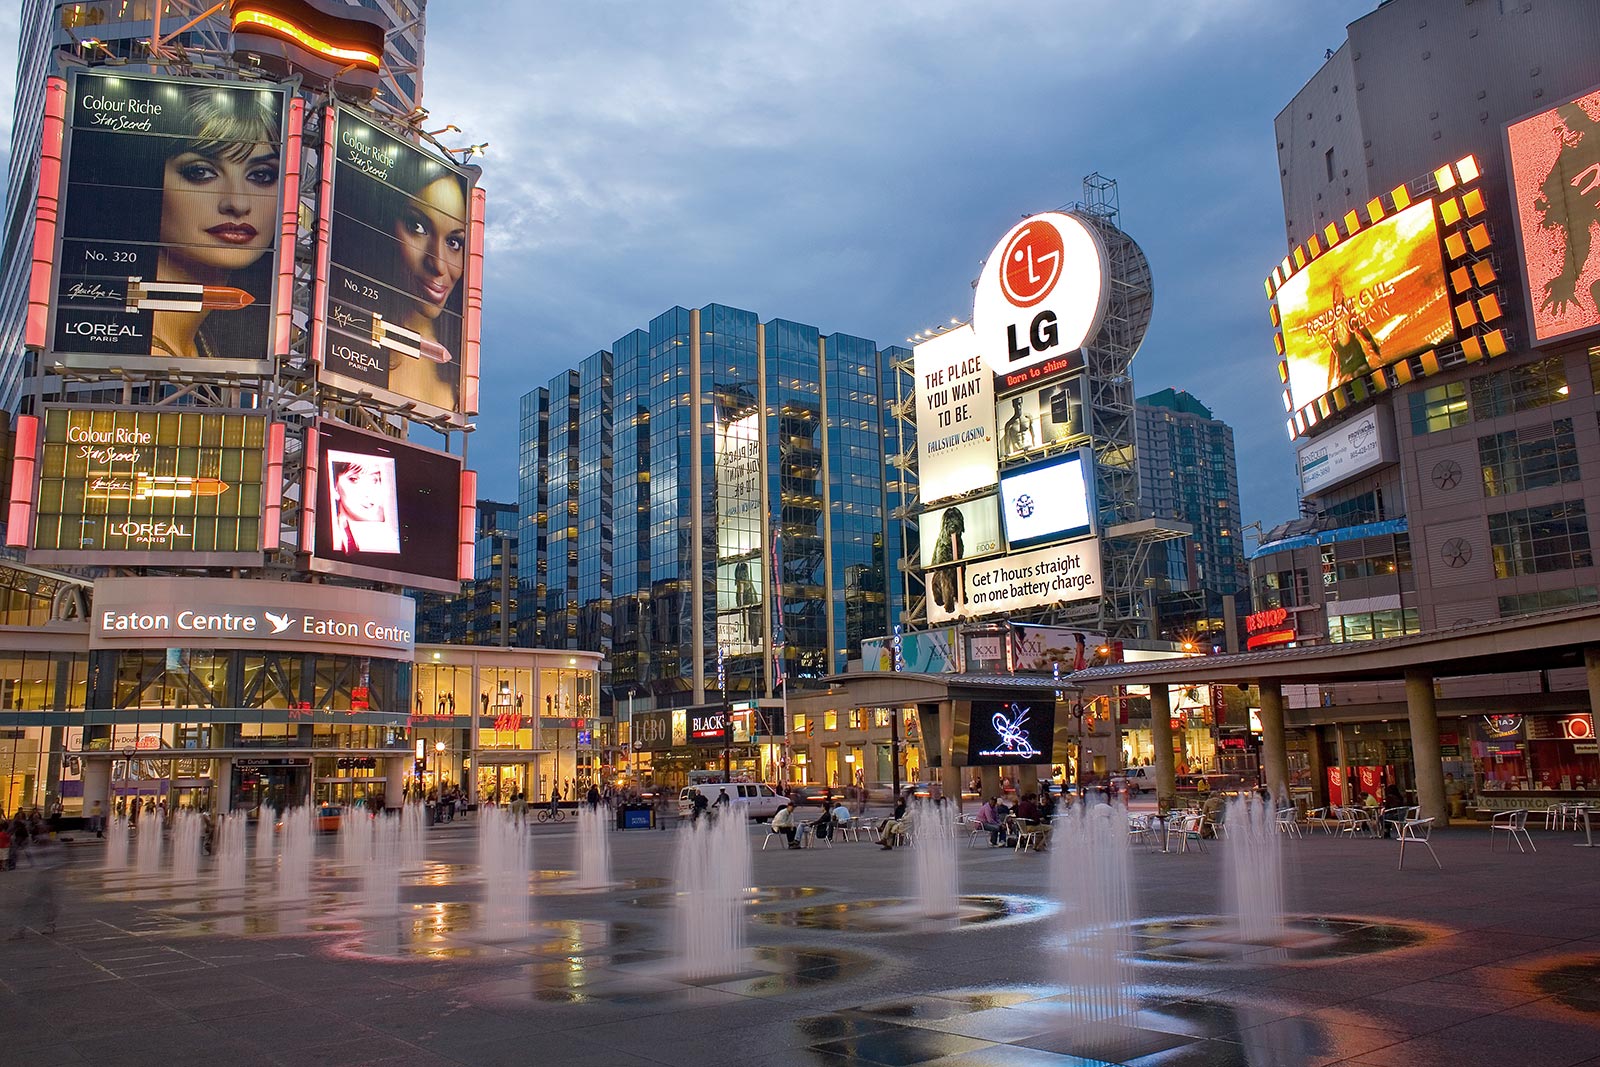 yonge-dundas-square, Fun Things To Do In Toronto, Attractions, Chelsea Hotel, Toronto